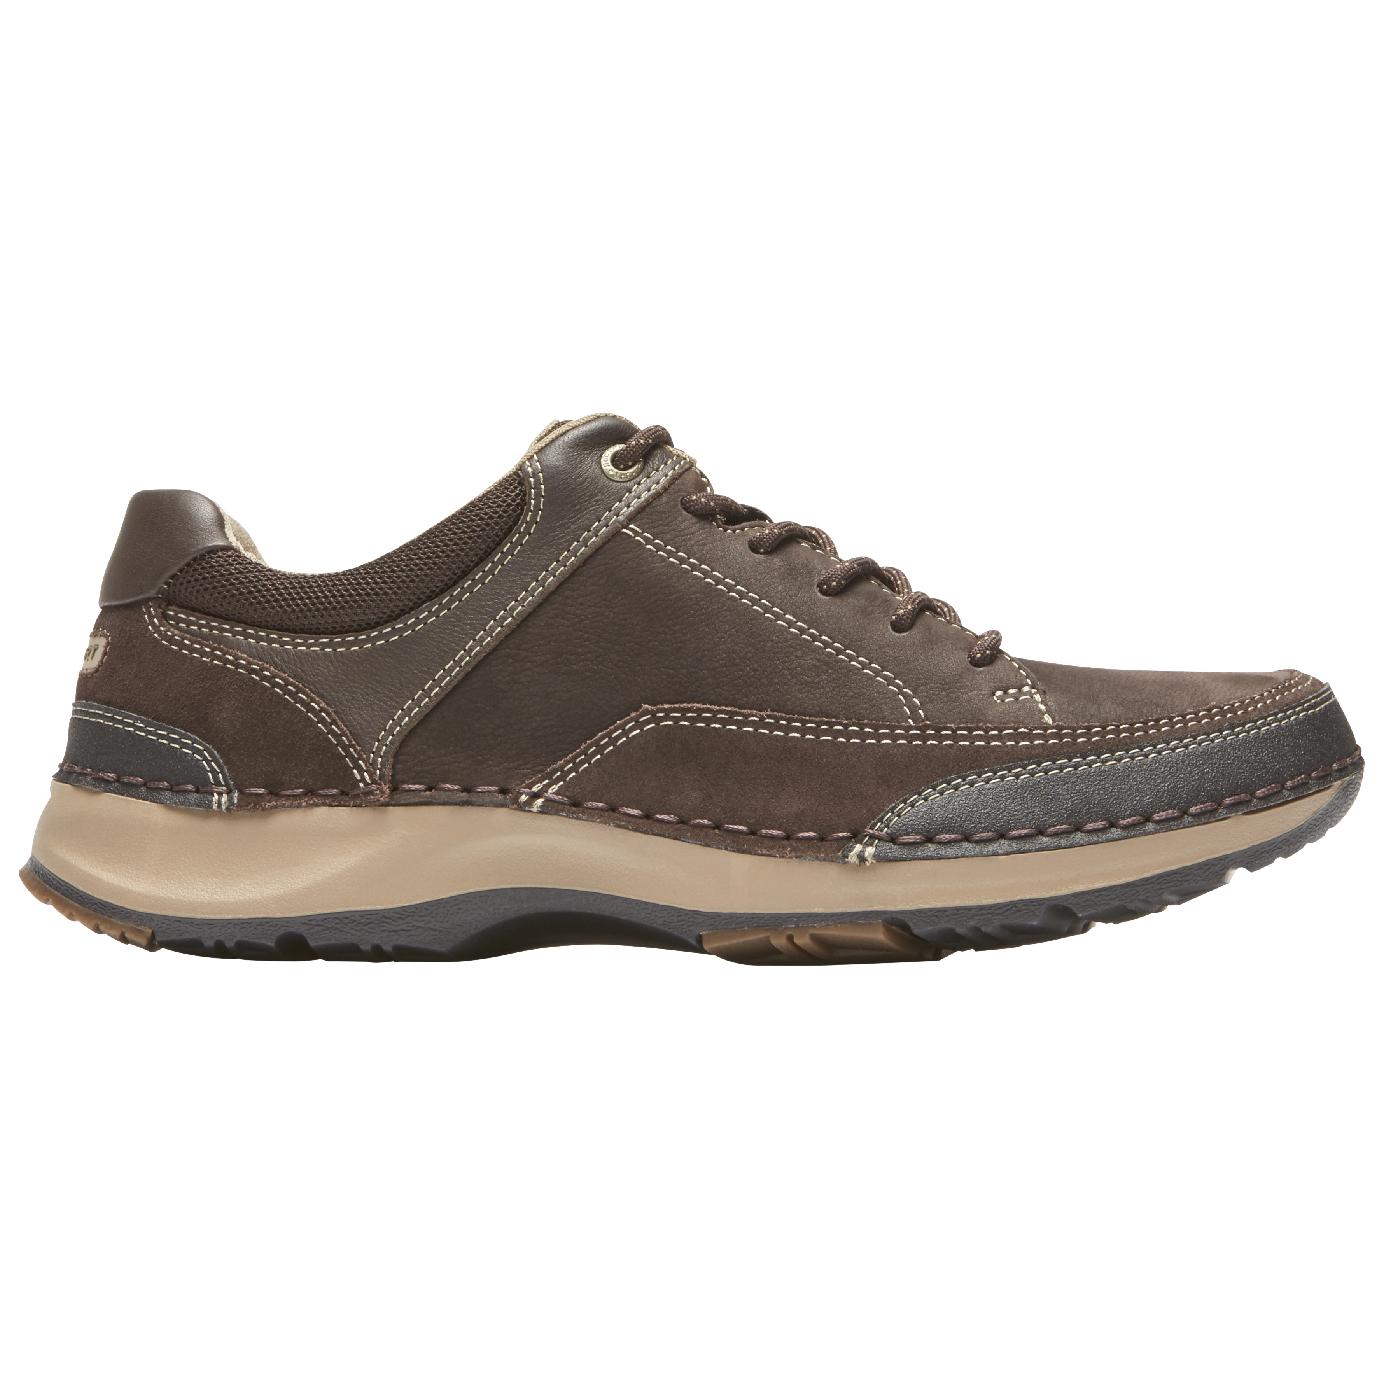 Top Selling Products Free Next Day Delivery Rockport Men's RocSports ...